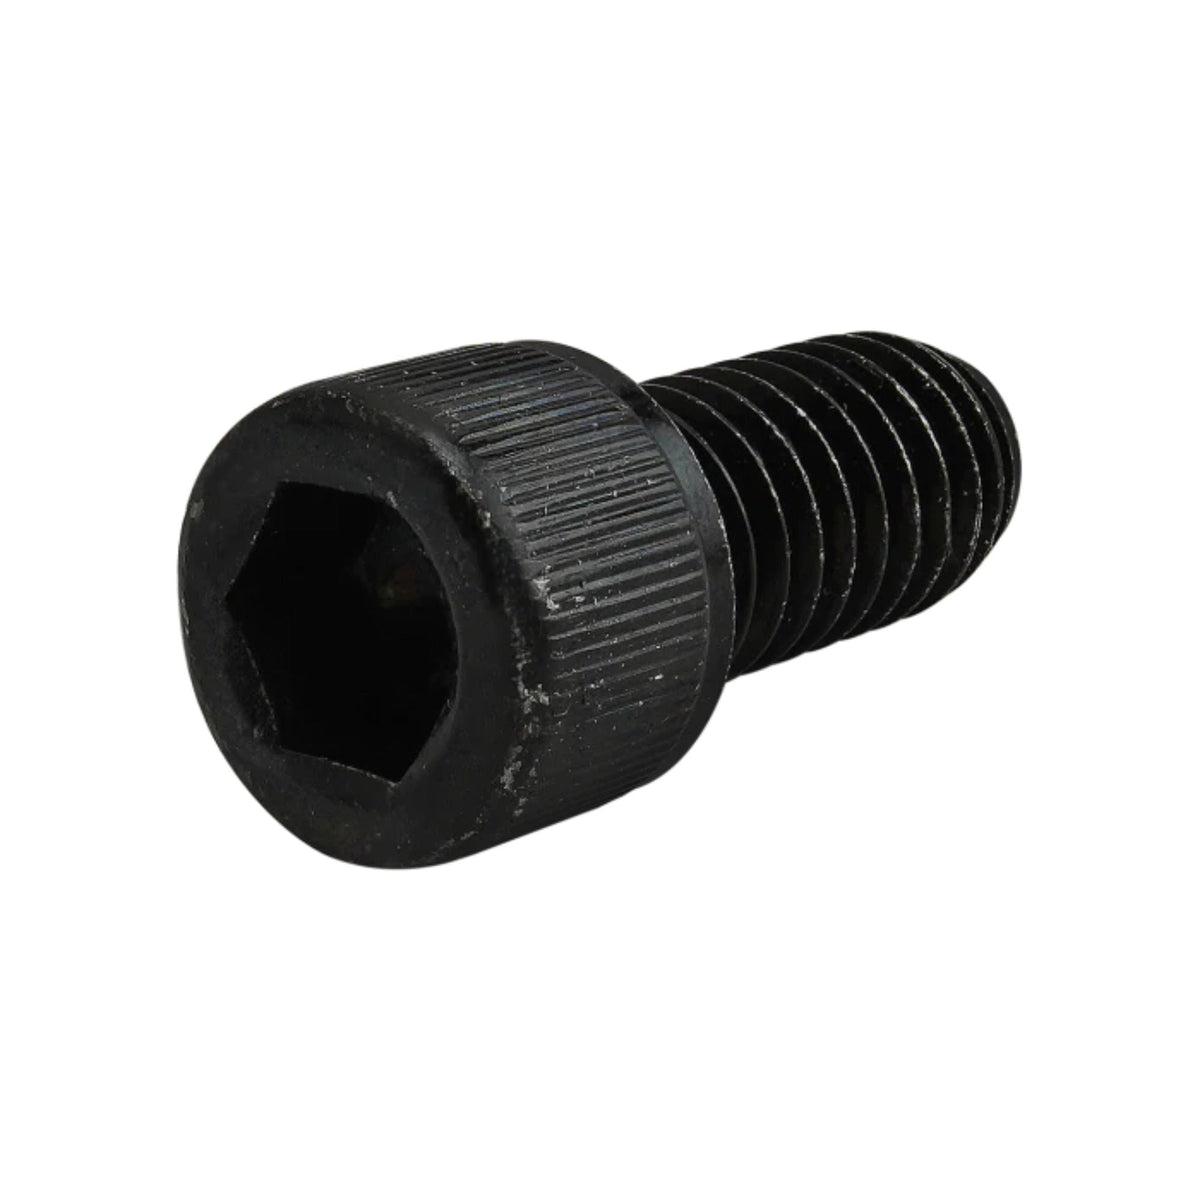 side view of a black metal socket head cap screw with the head on the left and the threading on the right